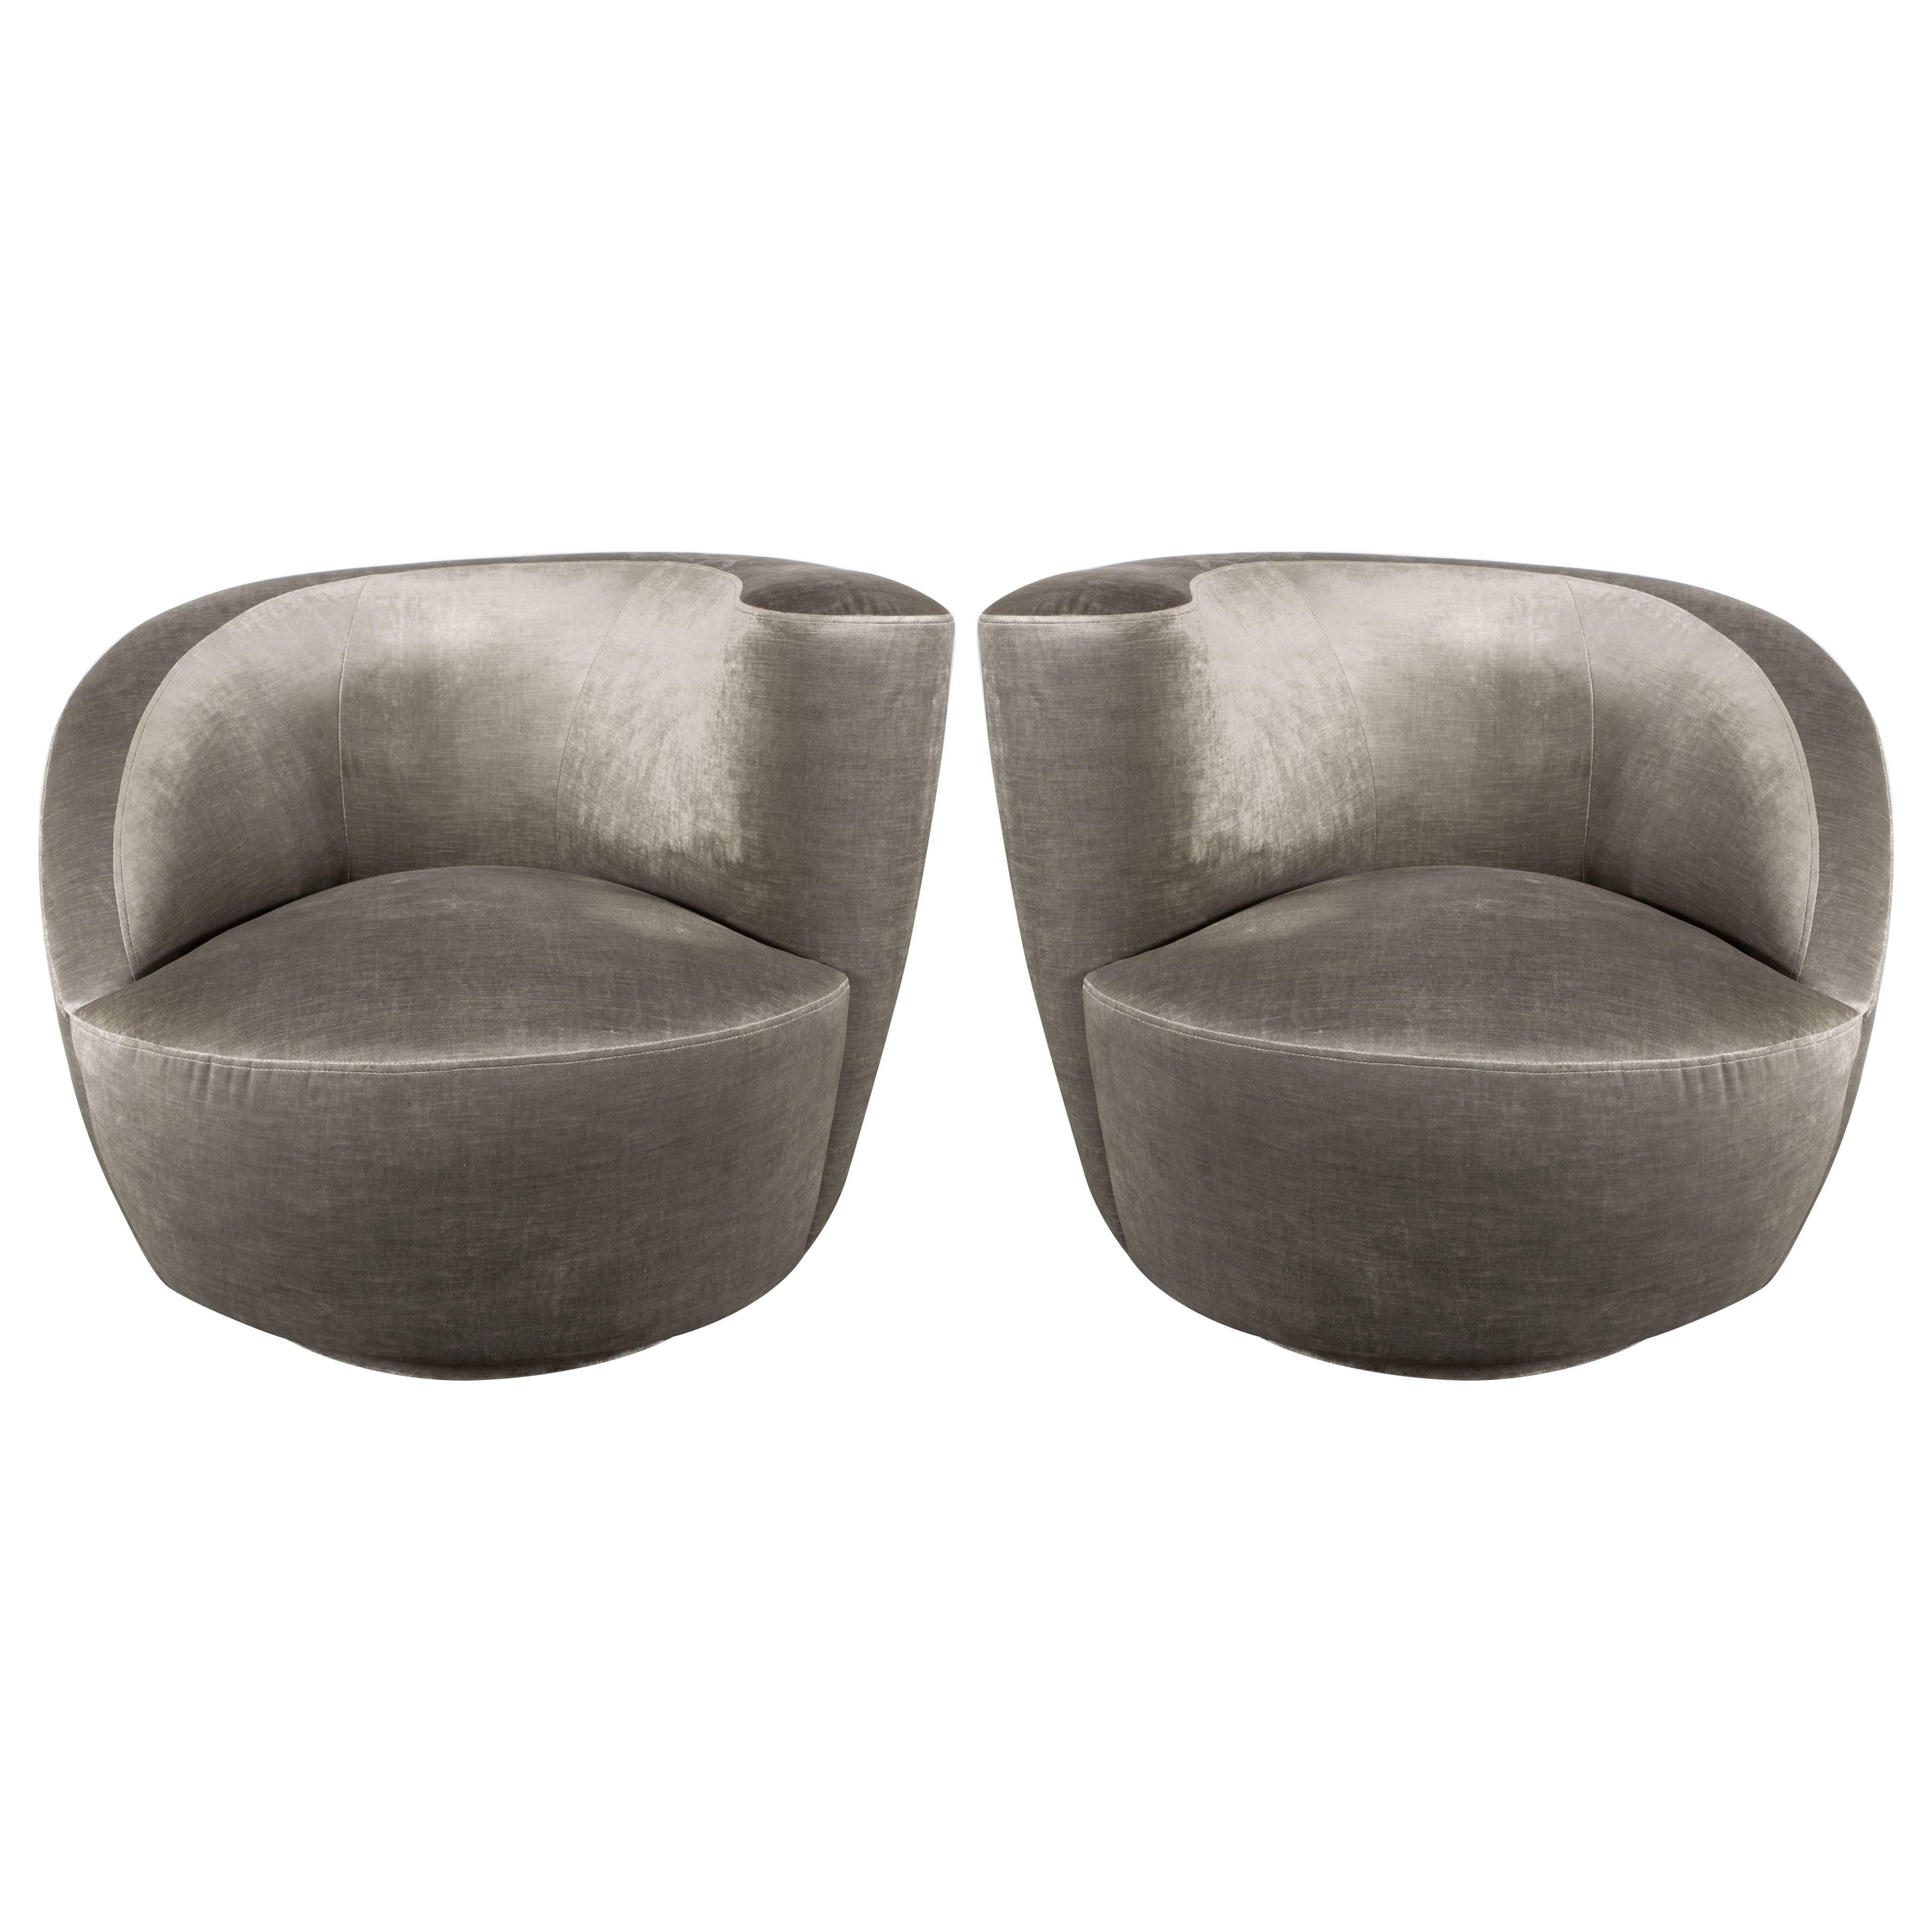 This pair of Nautilus chairs exemplify the stunning organic futurist forms and clean lines for which Vladimir Kagan one of the most esteemed furniture designers of the 20th century is celebrated. The chairs' form suggests an abstracted